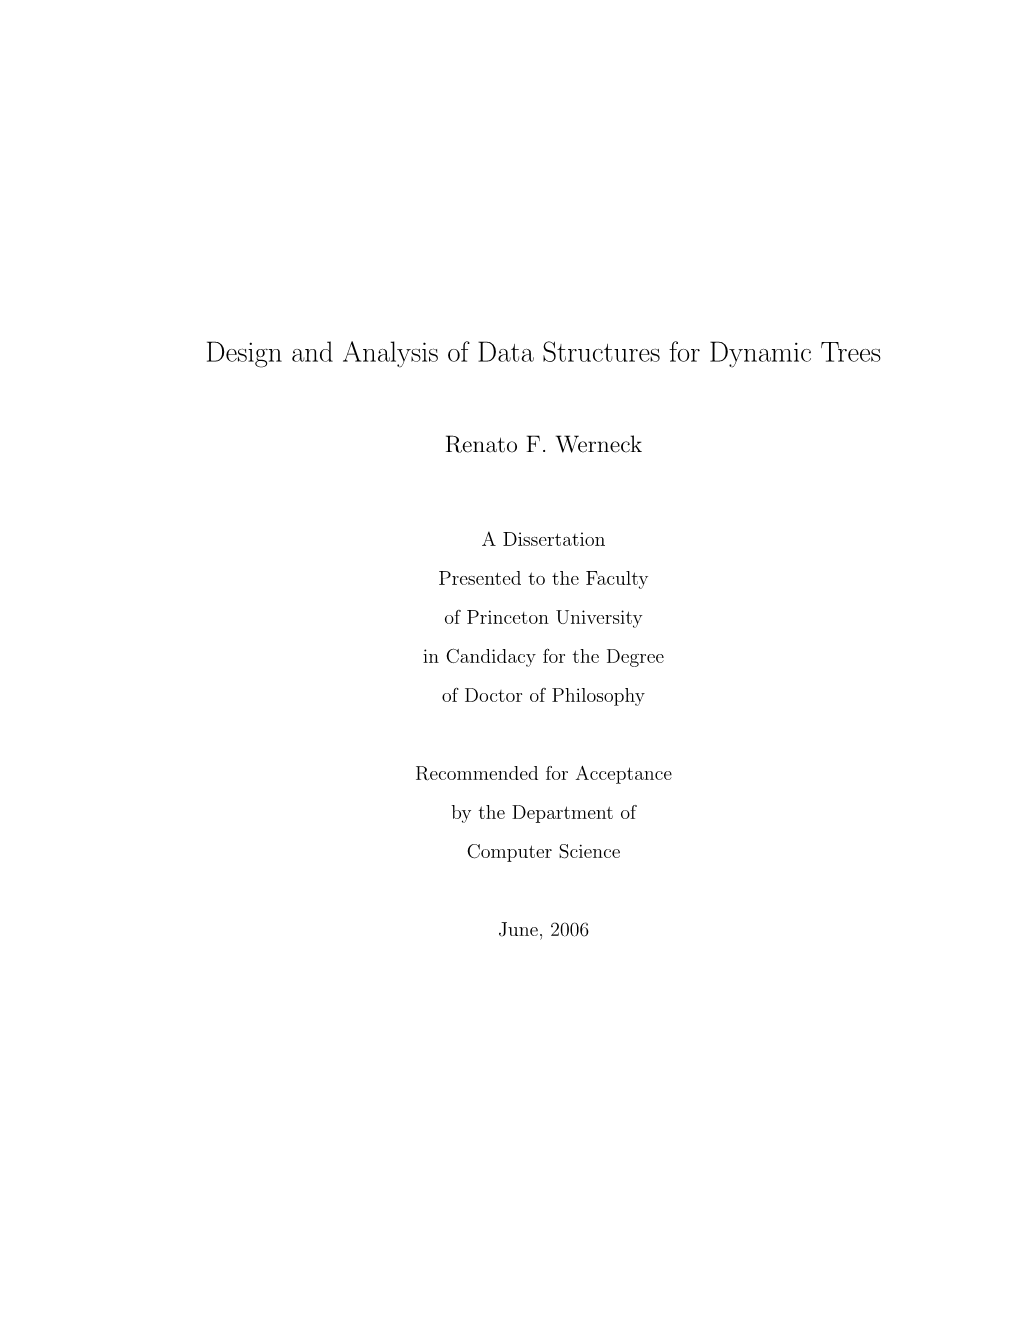 Design and Analysis of Data Structures for Dynamic Trees